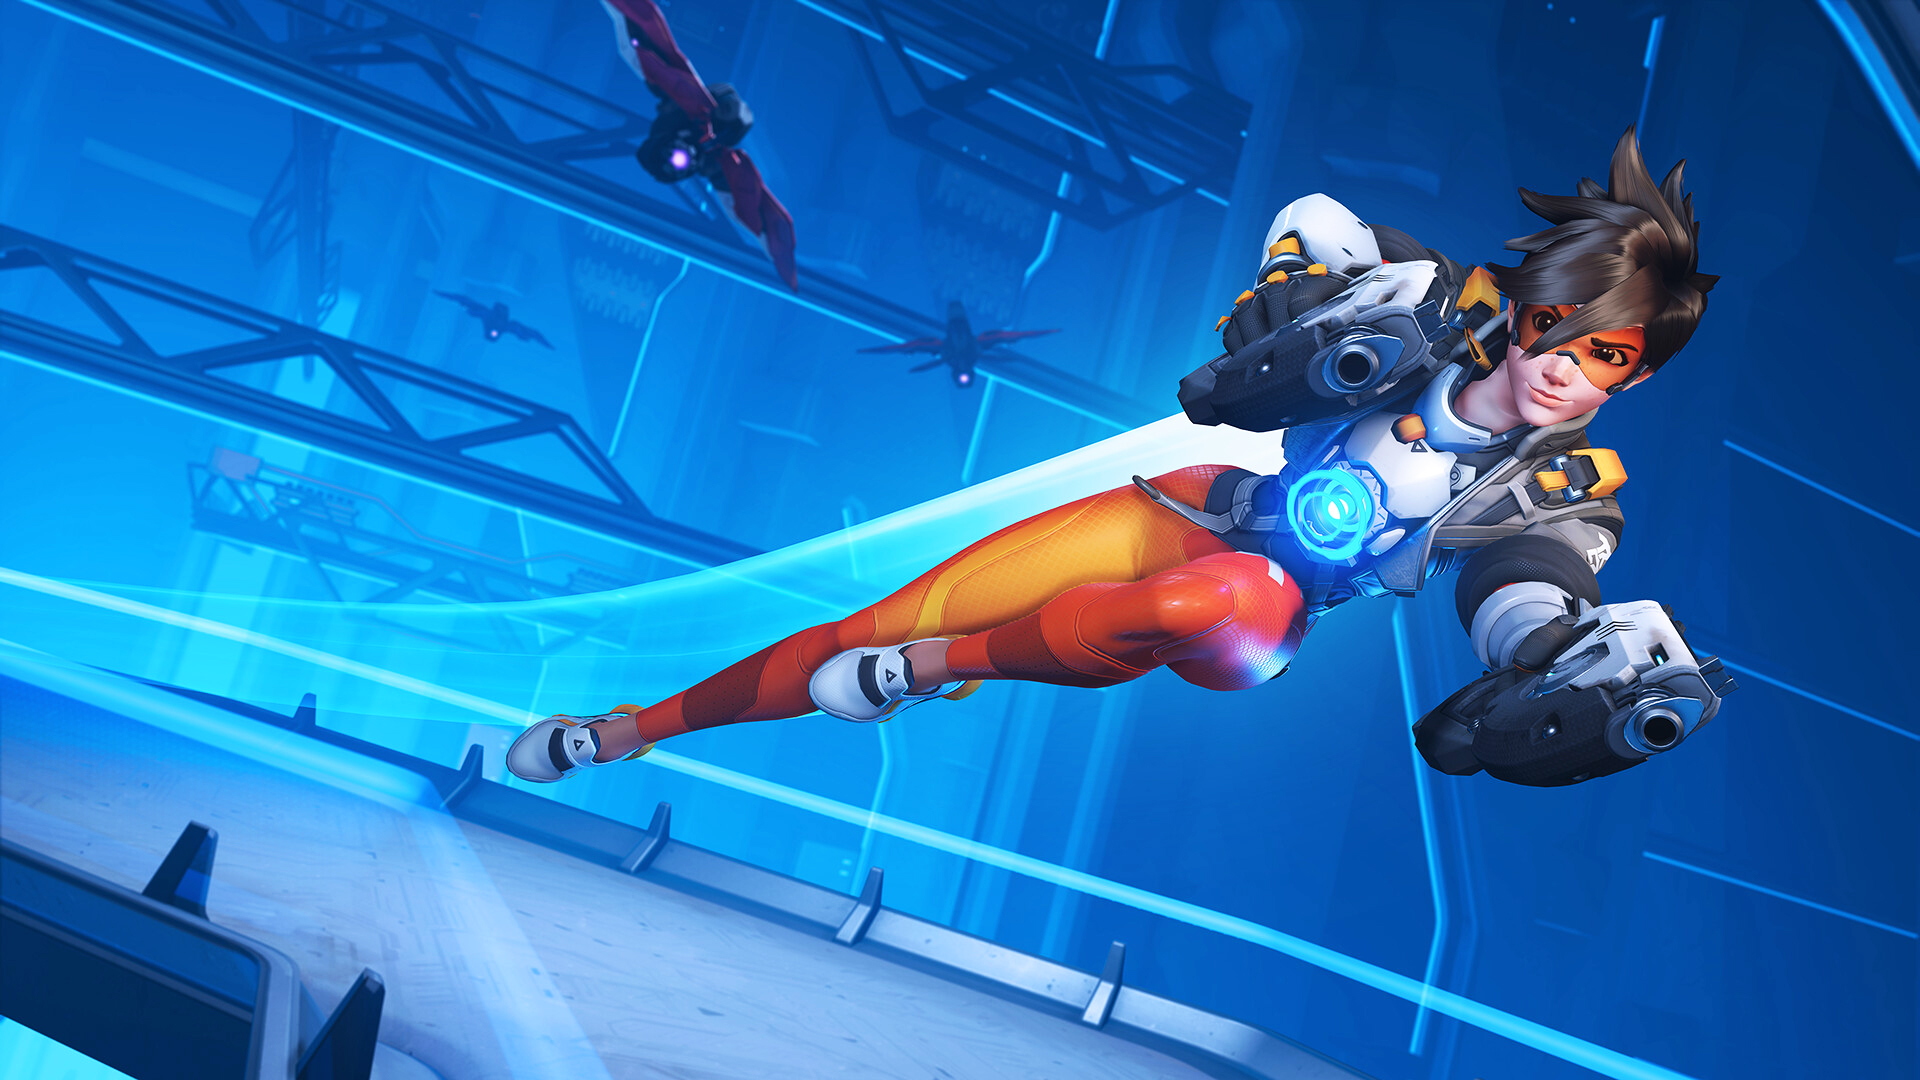 Naeri X 나에리 on X: Overwatch 2 New Look Tracer⏰ Evolutions to the game's  technology, like new shaders and lighting, gave the Overwatch team a  greater ability to render characters in fine